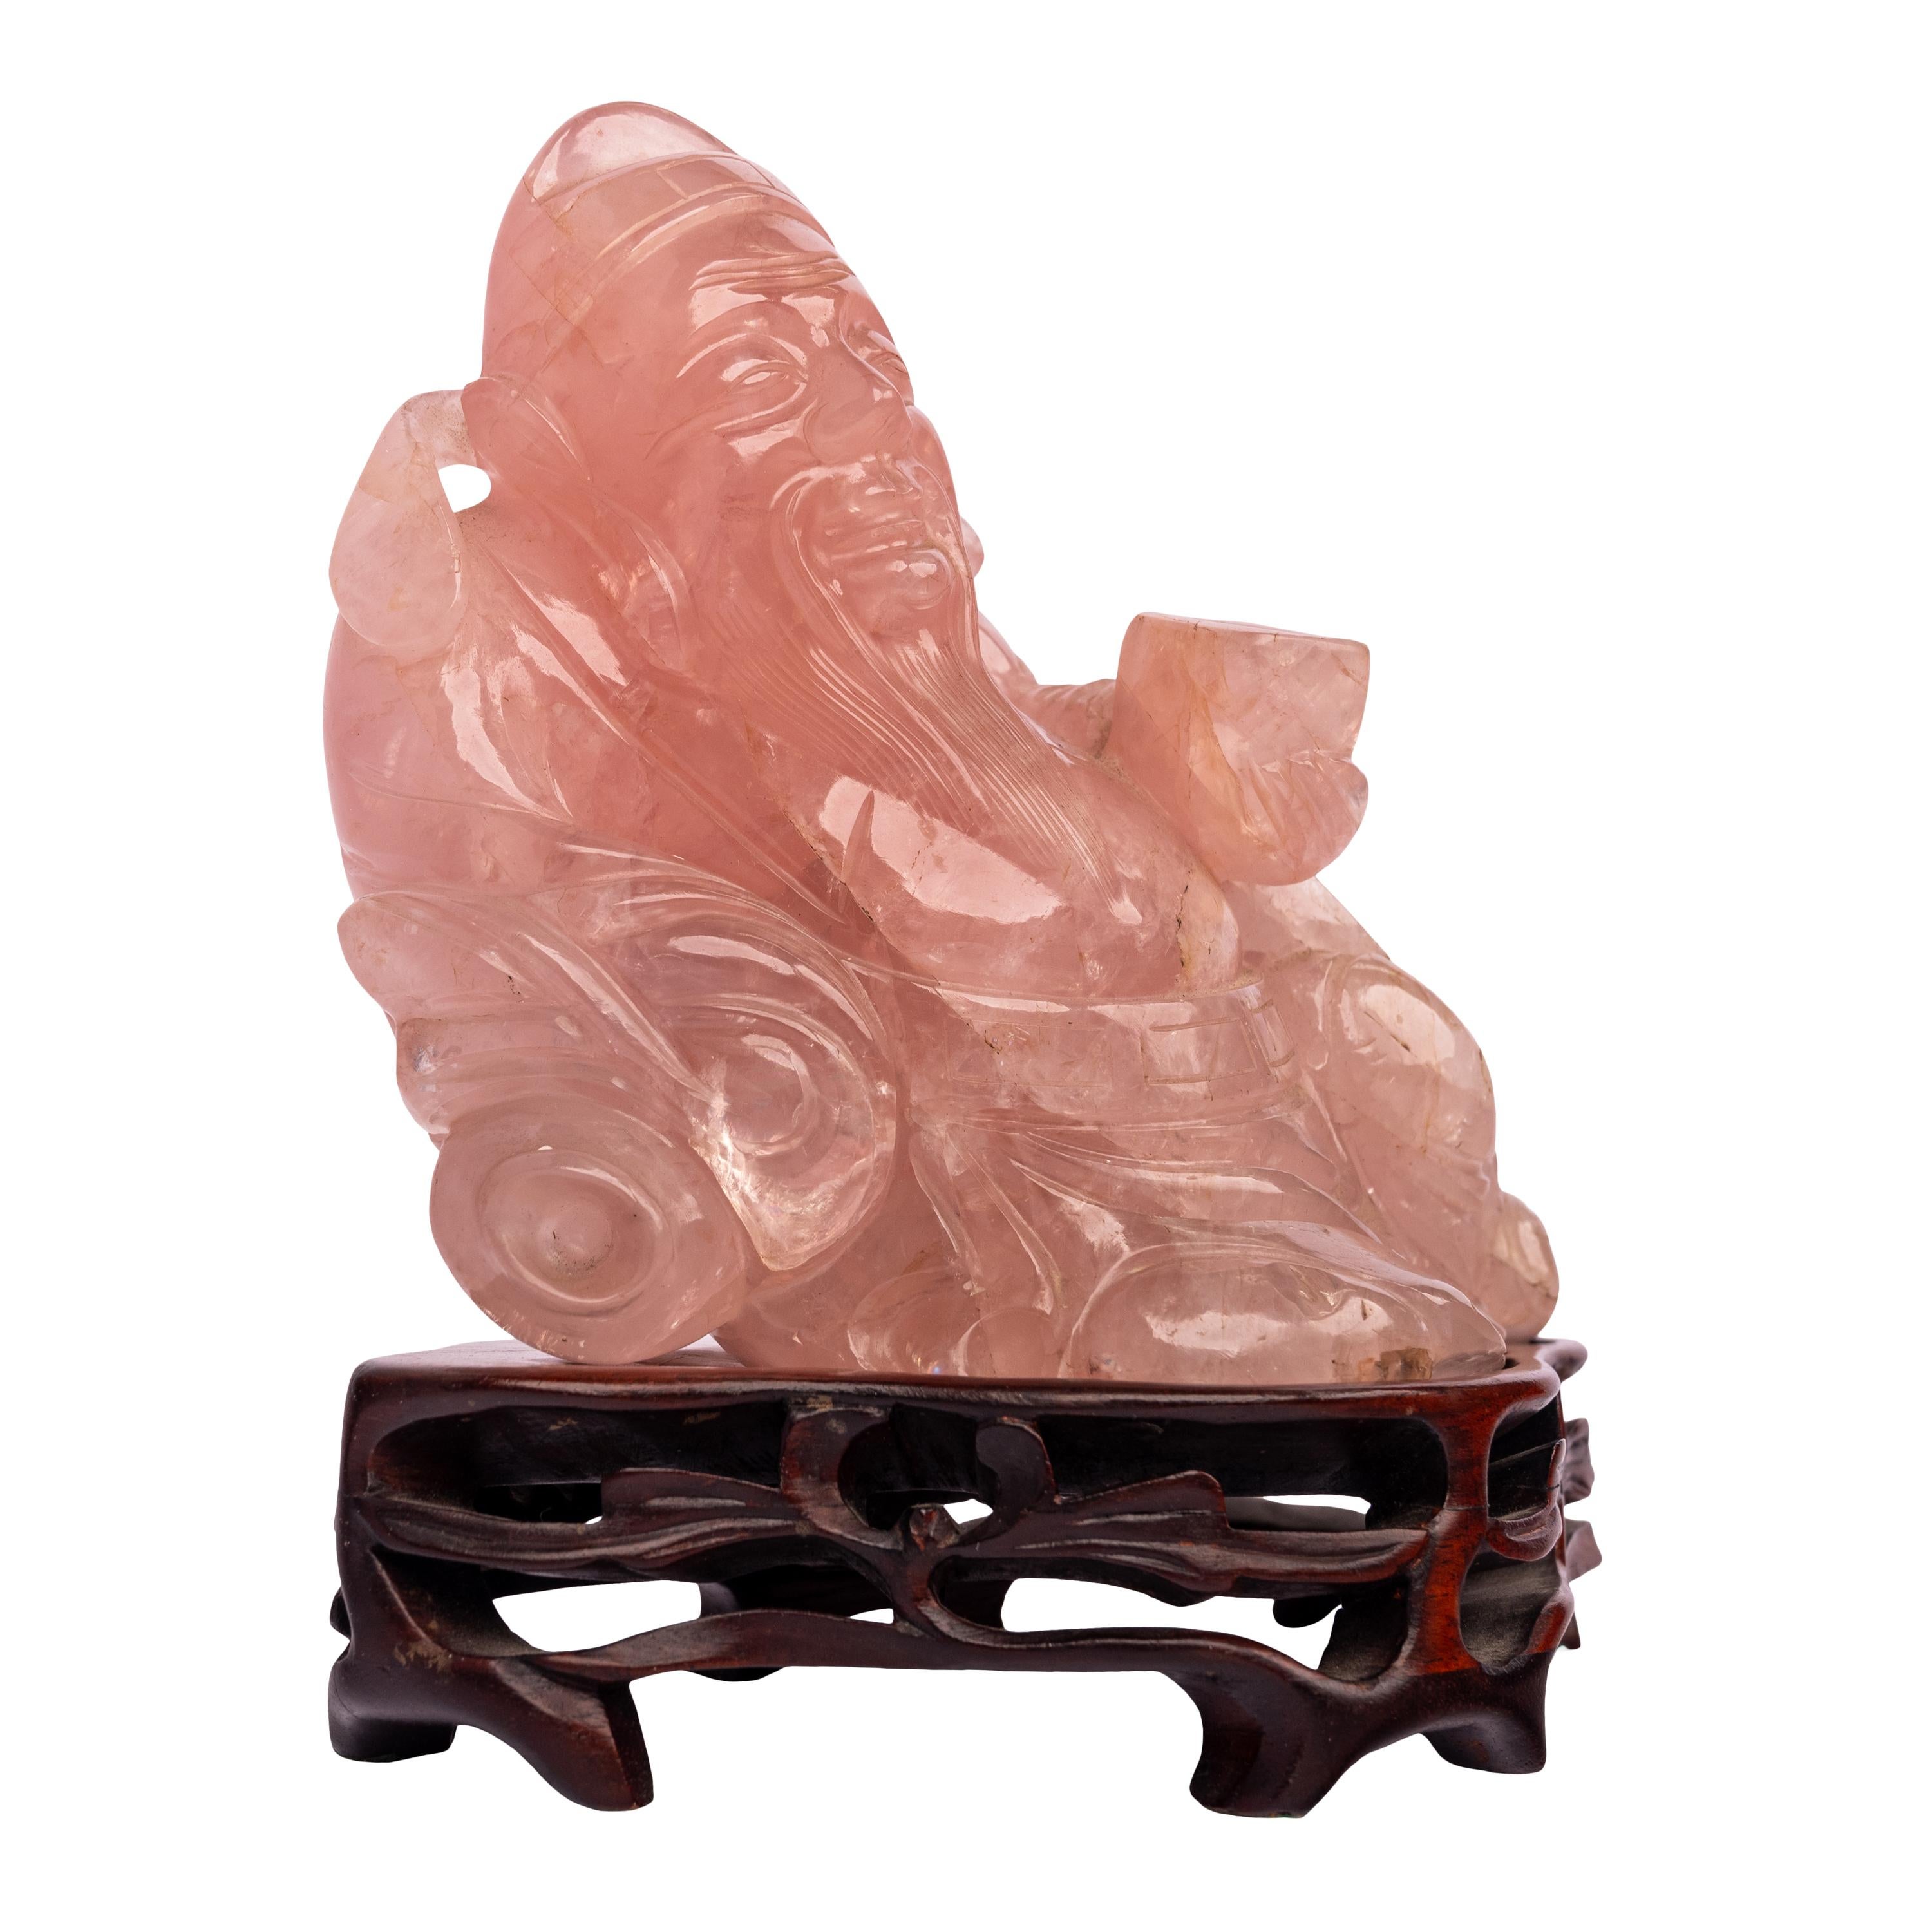 A good antique Chinese Qing dynasty carved rose quartz buddha/hotei figure on a carved rosewood stand, circa 1910.
The figure modeled as a buddhistic recumbent figure, the figure is finely carved from rose quartz and rests on a carved rosewood